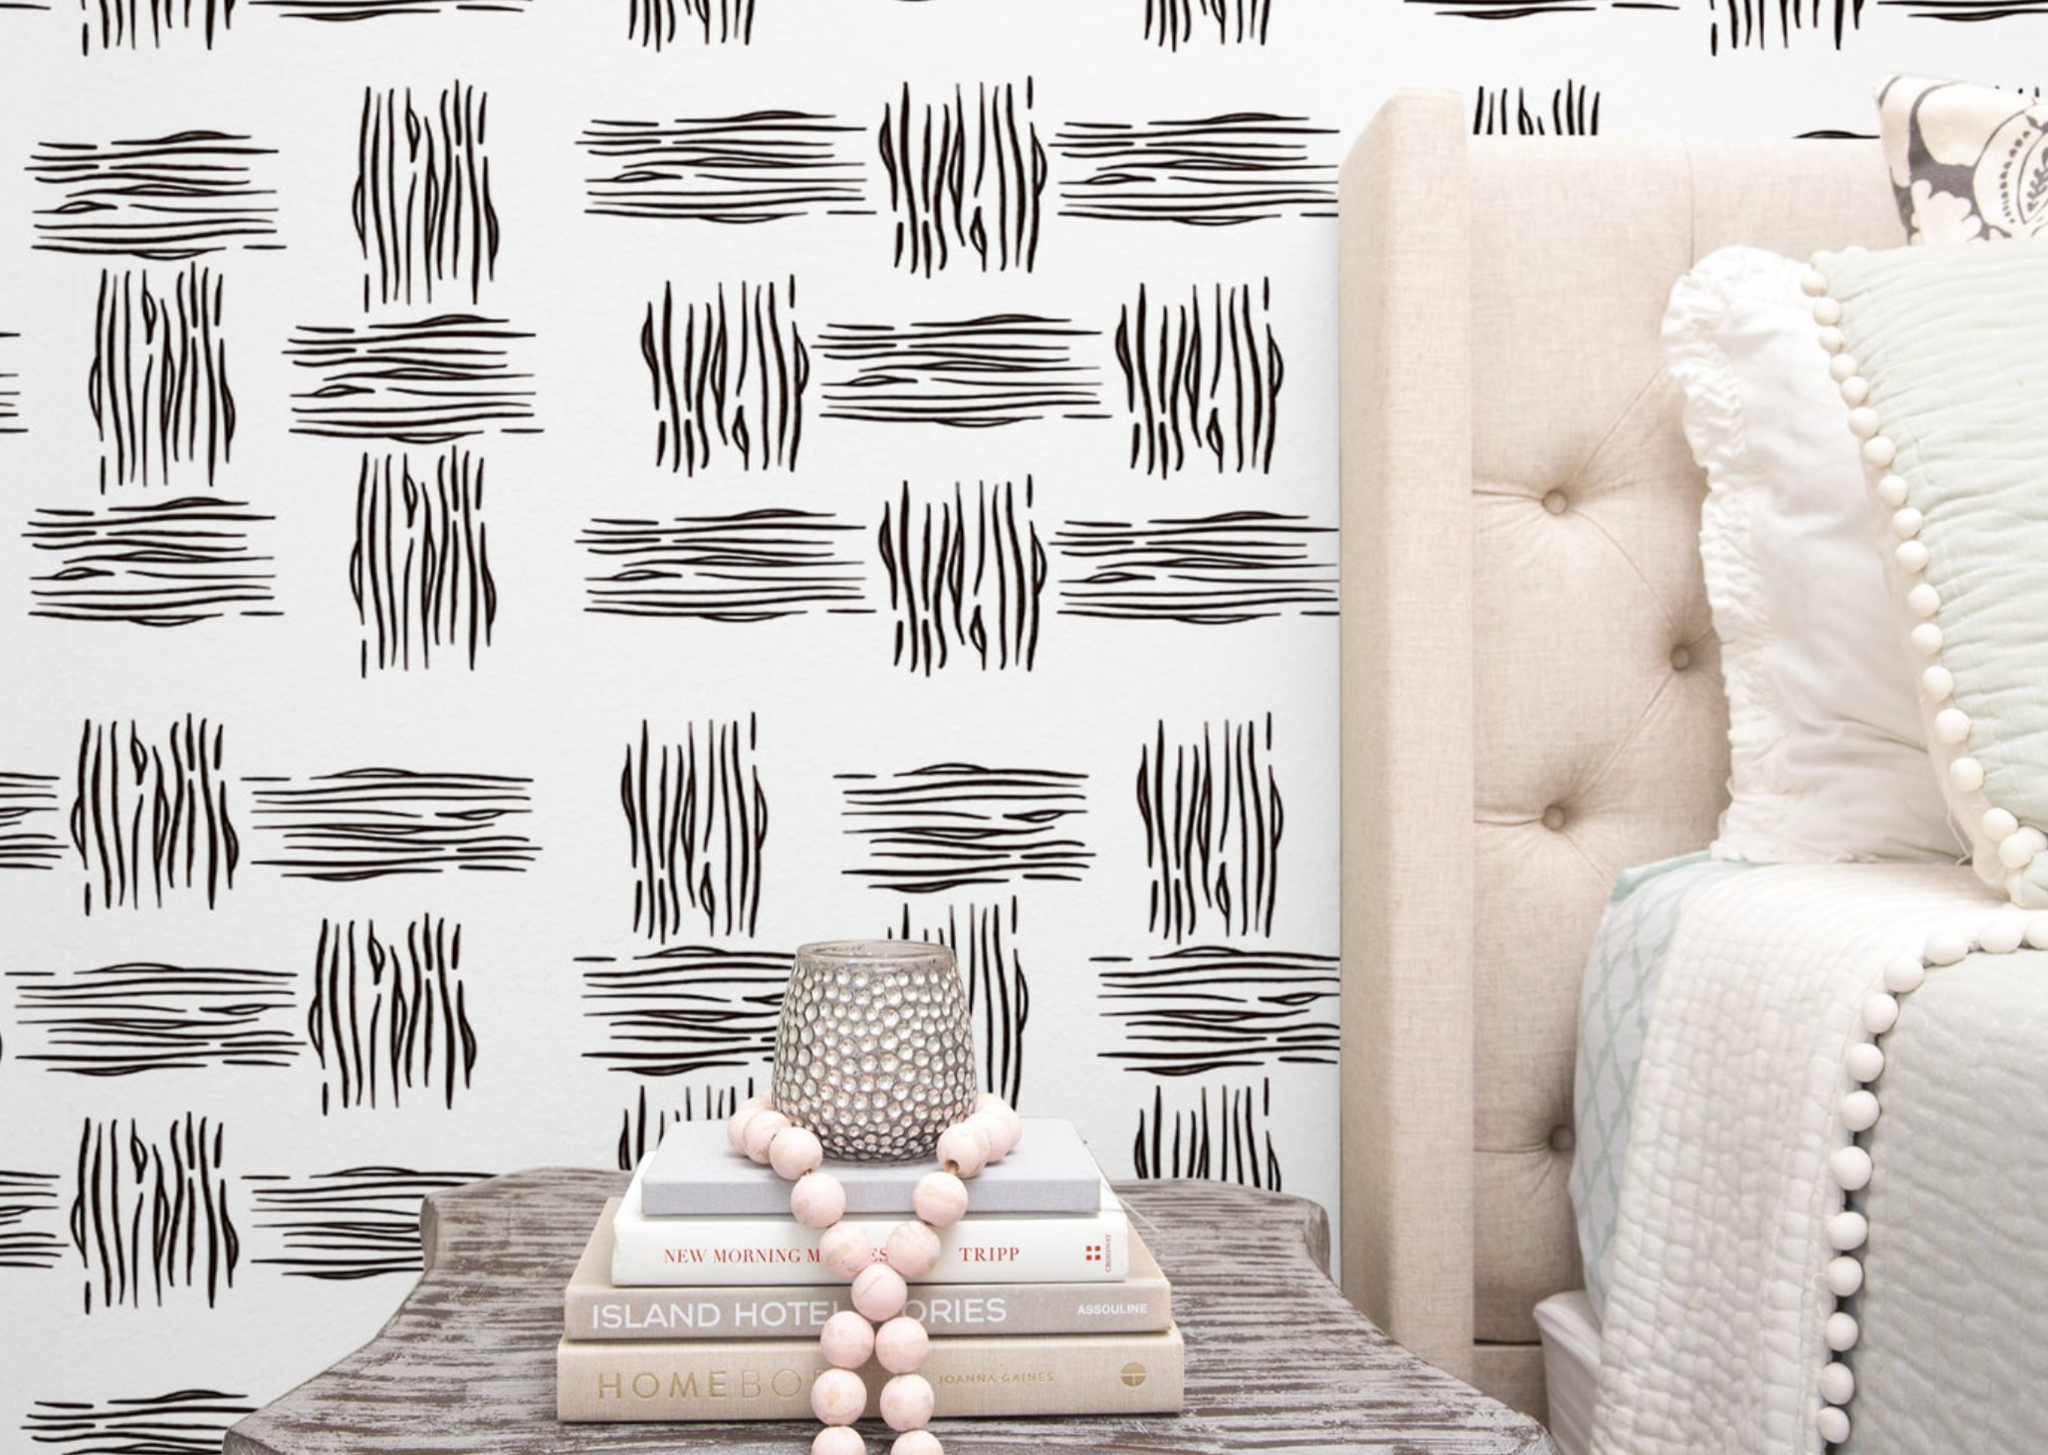 Squiggly Zebra Designs - Nursery Wall Decor Wallpapers